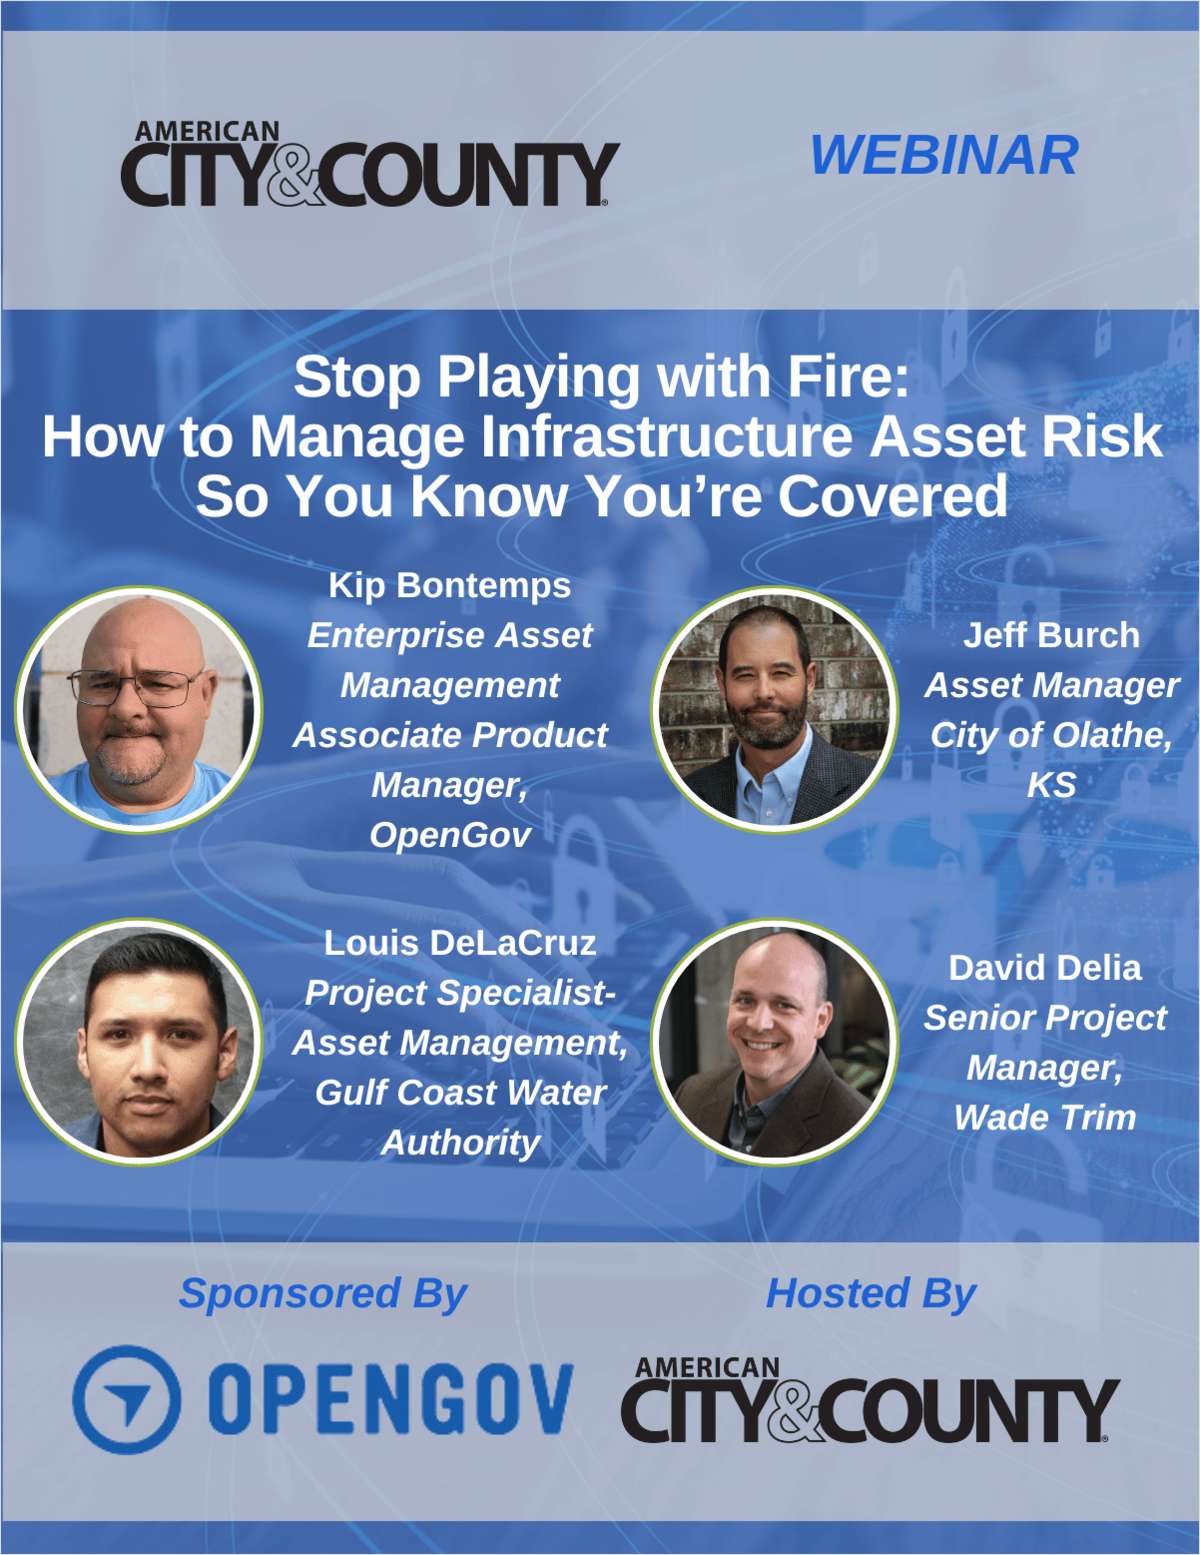 Stop Playing with Fire: How to Manage Infrastructure Asset Risk So You Know You're Covered